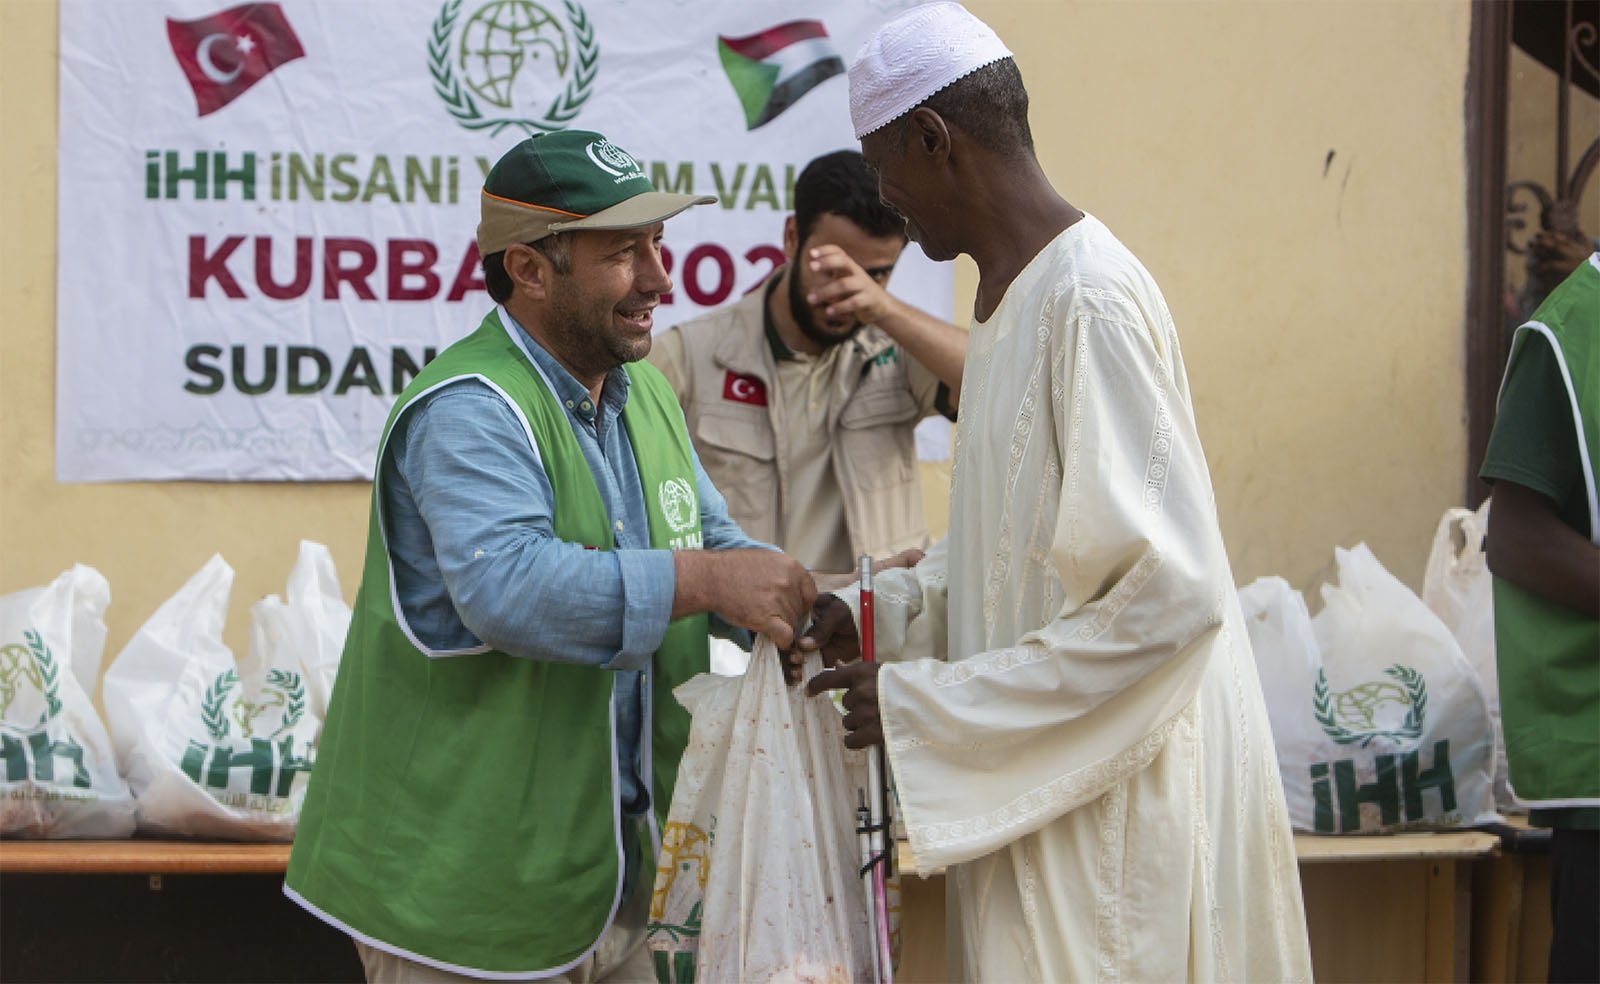 A volunteer from Turkish charity IHH delivers meat in Khartoum, Sudan, July 22, 2021. (Courtesy of IHH)